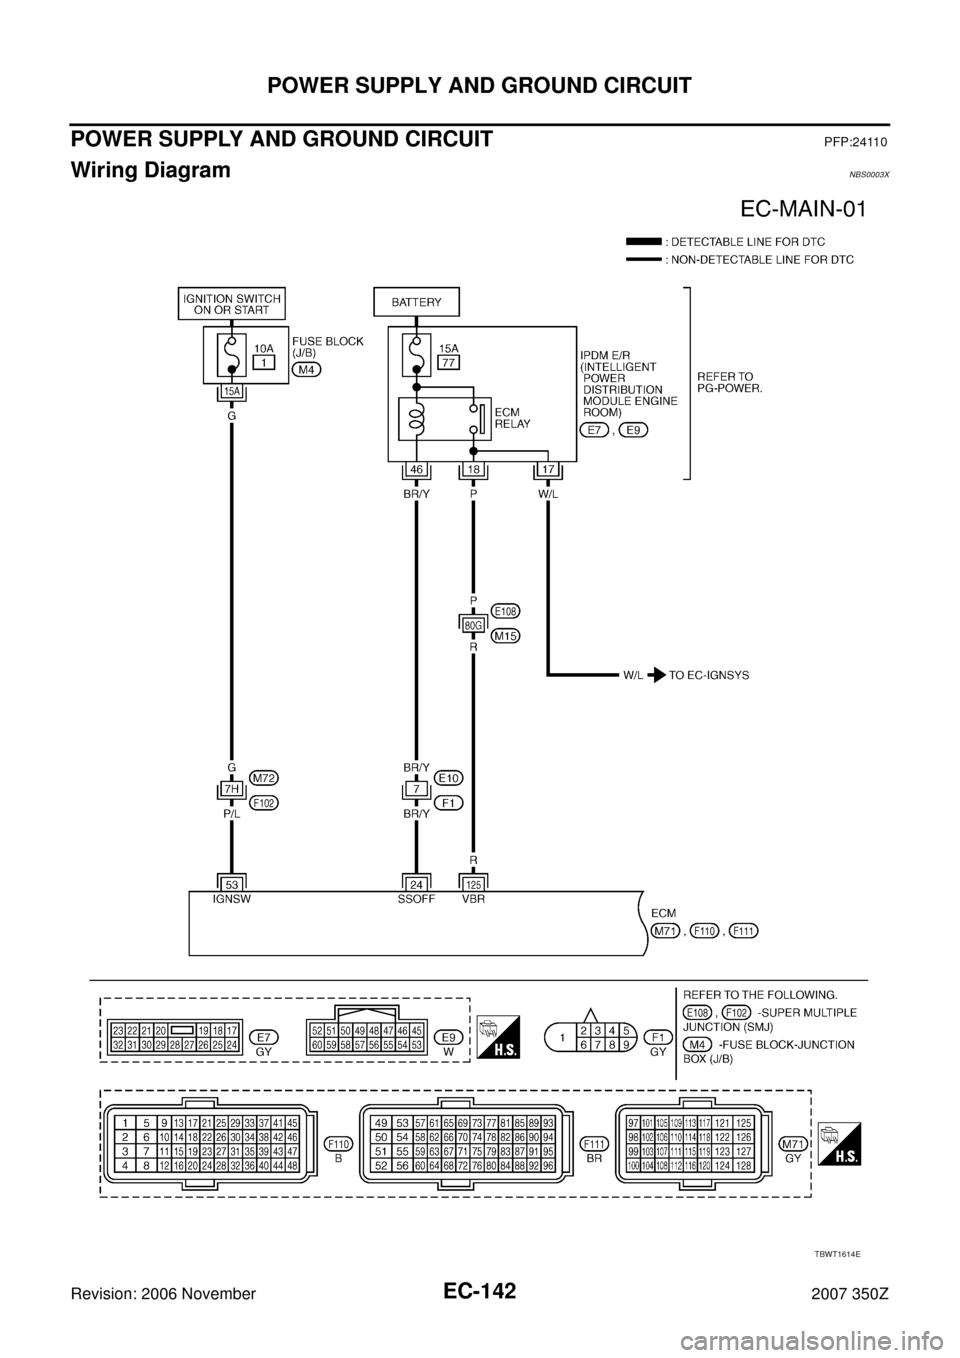 NISSAN 350Z 2007 Z33 Engine Control User Guide EC-142
POWER SUPPLY AND GROUND CIRCUIT
Revision: 2006 November2007 350Z
POWER SUPPLY AND GROUND CIRCUITPFP:24110
Wiring DiagramNBS0003X
TBWT1614E 